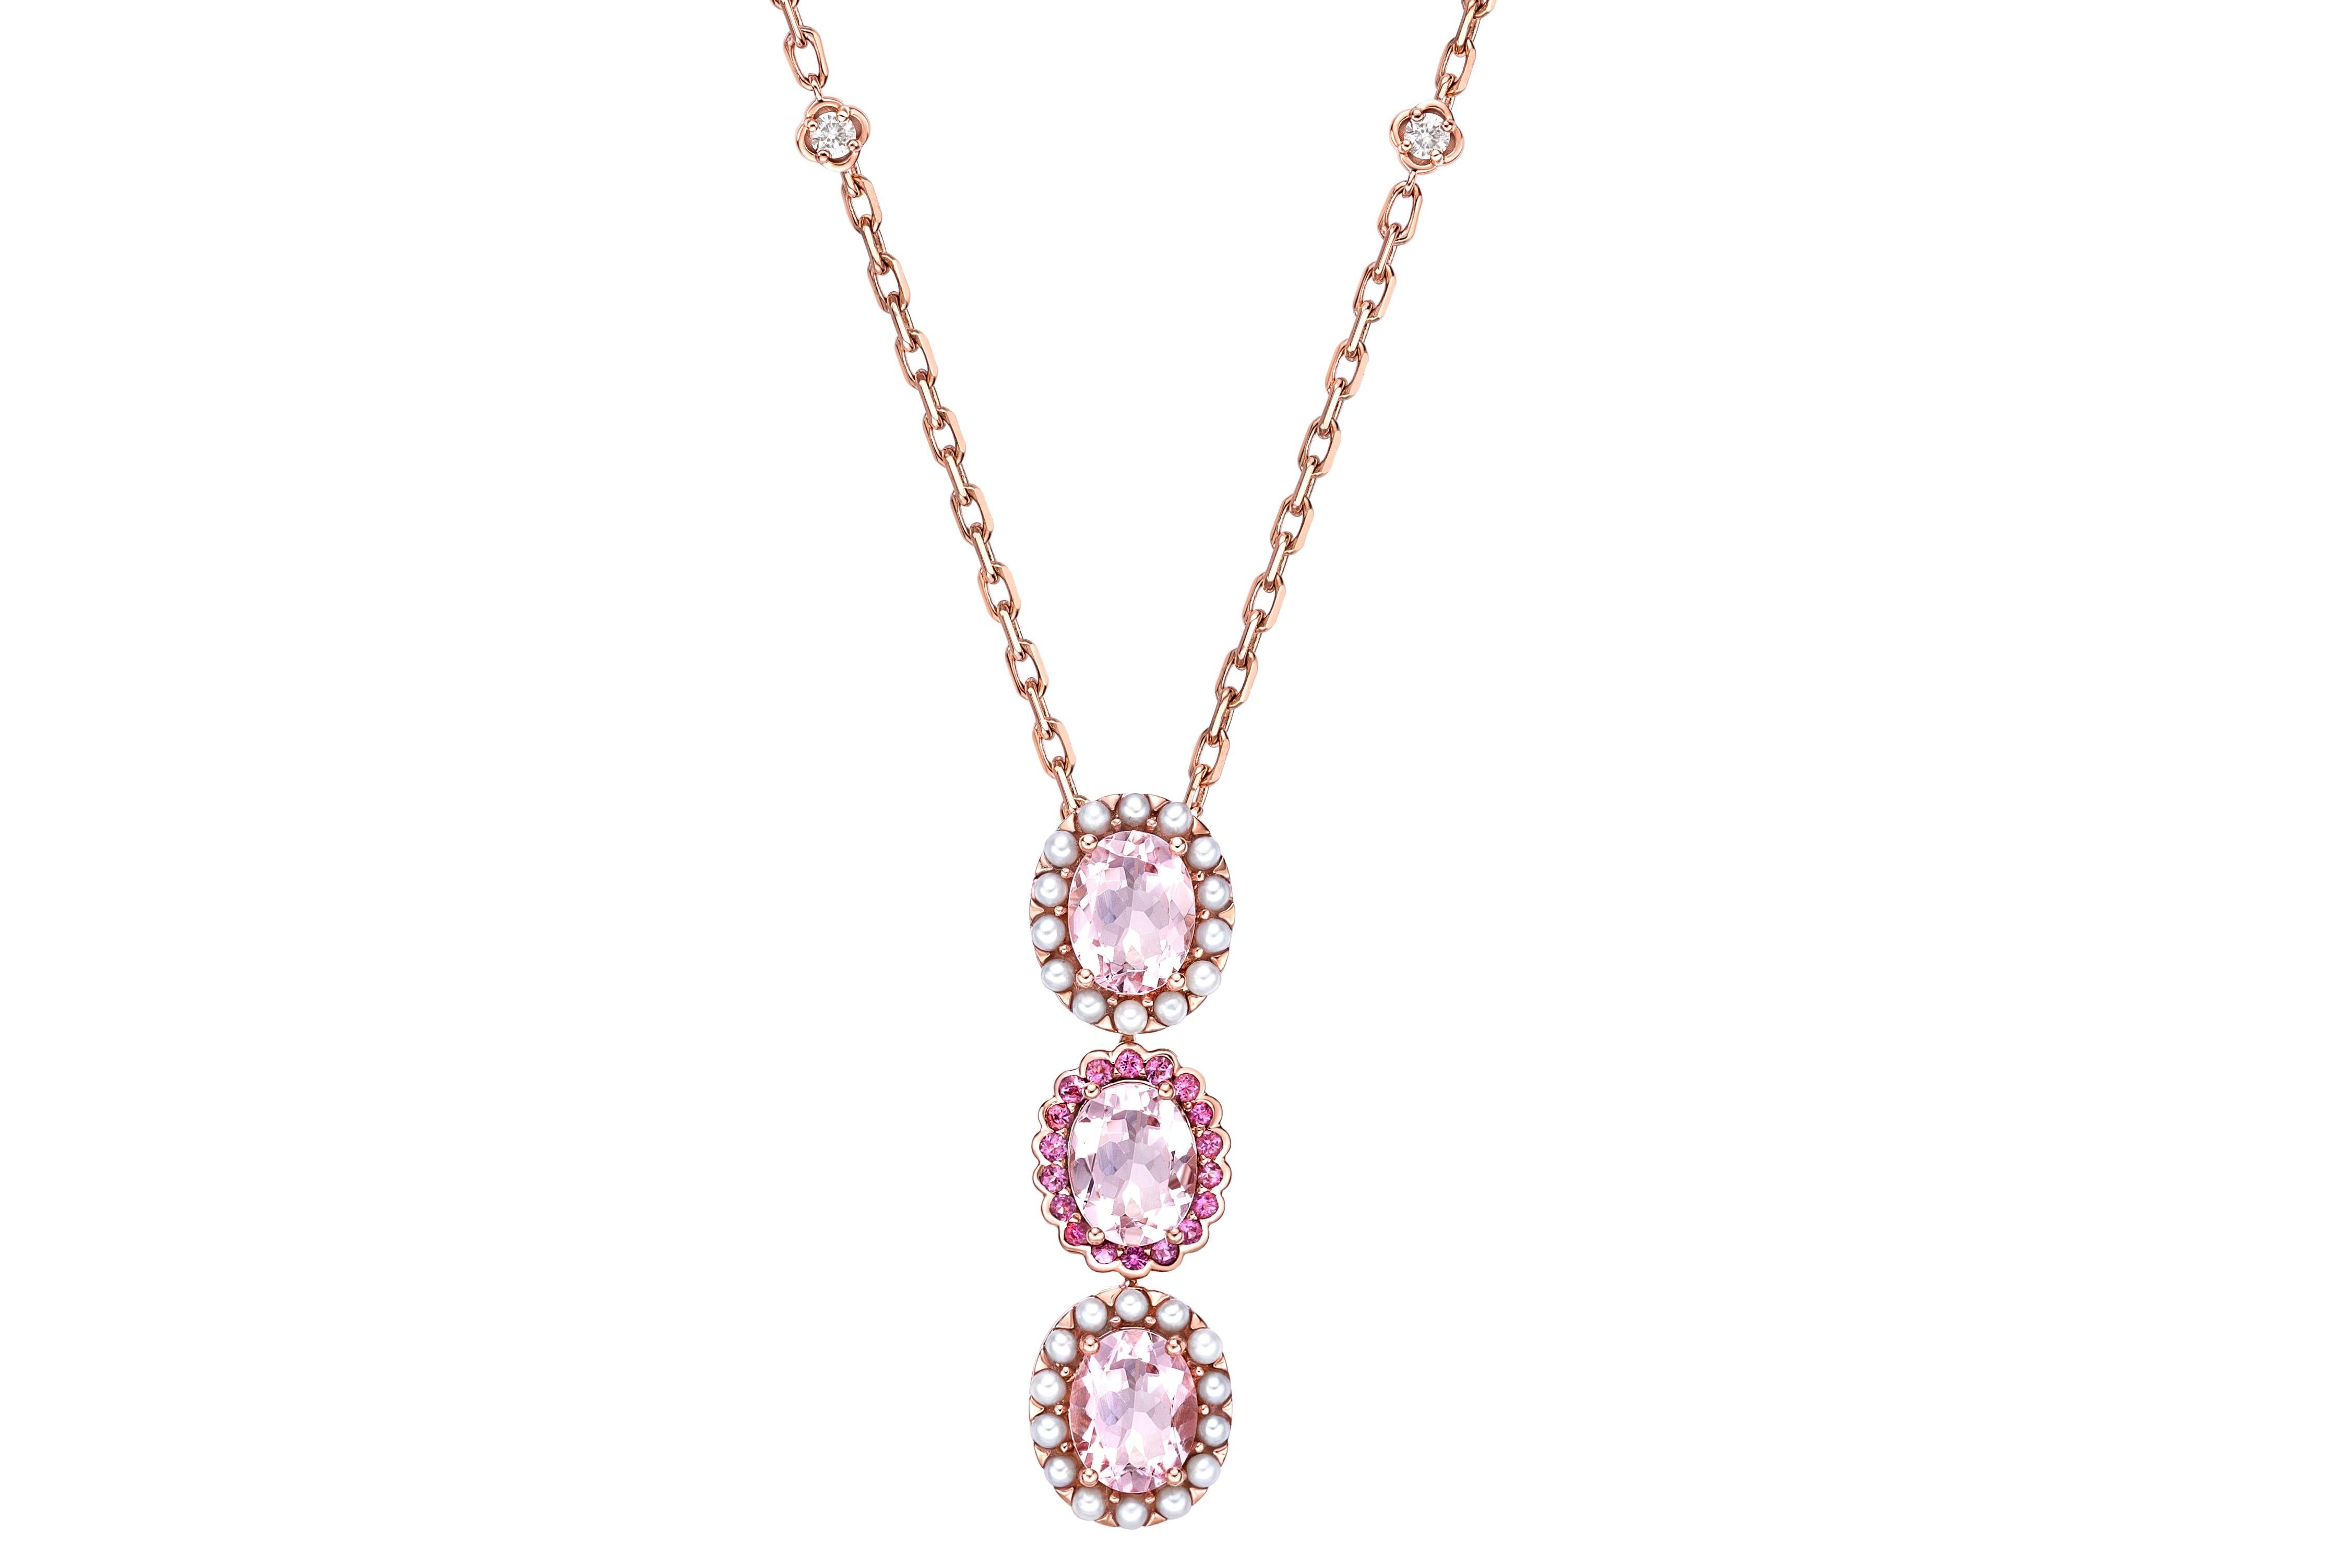 Contemporary Pink Morganite Pendant Necklace with Tourmaline, Pearl & Diamond in 18KRG. For Sale